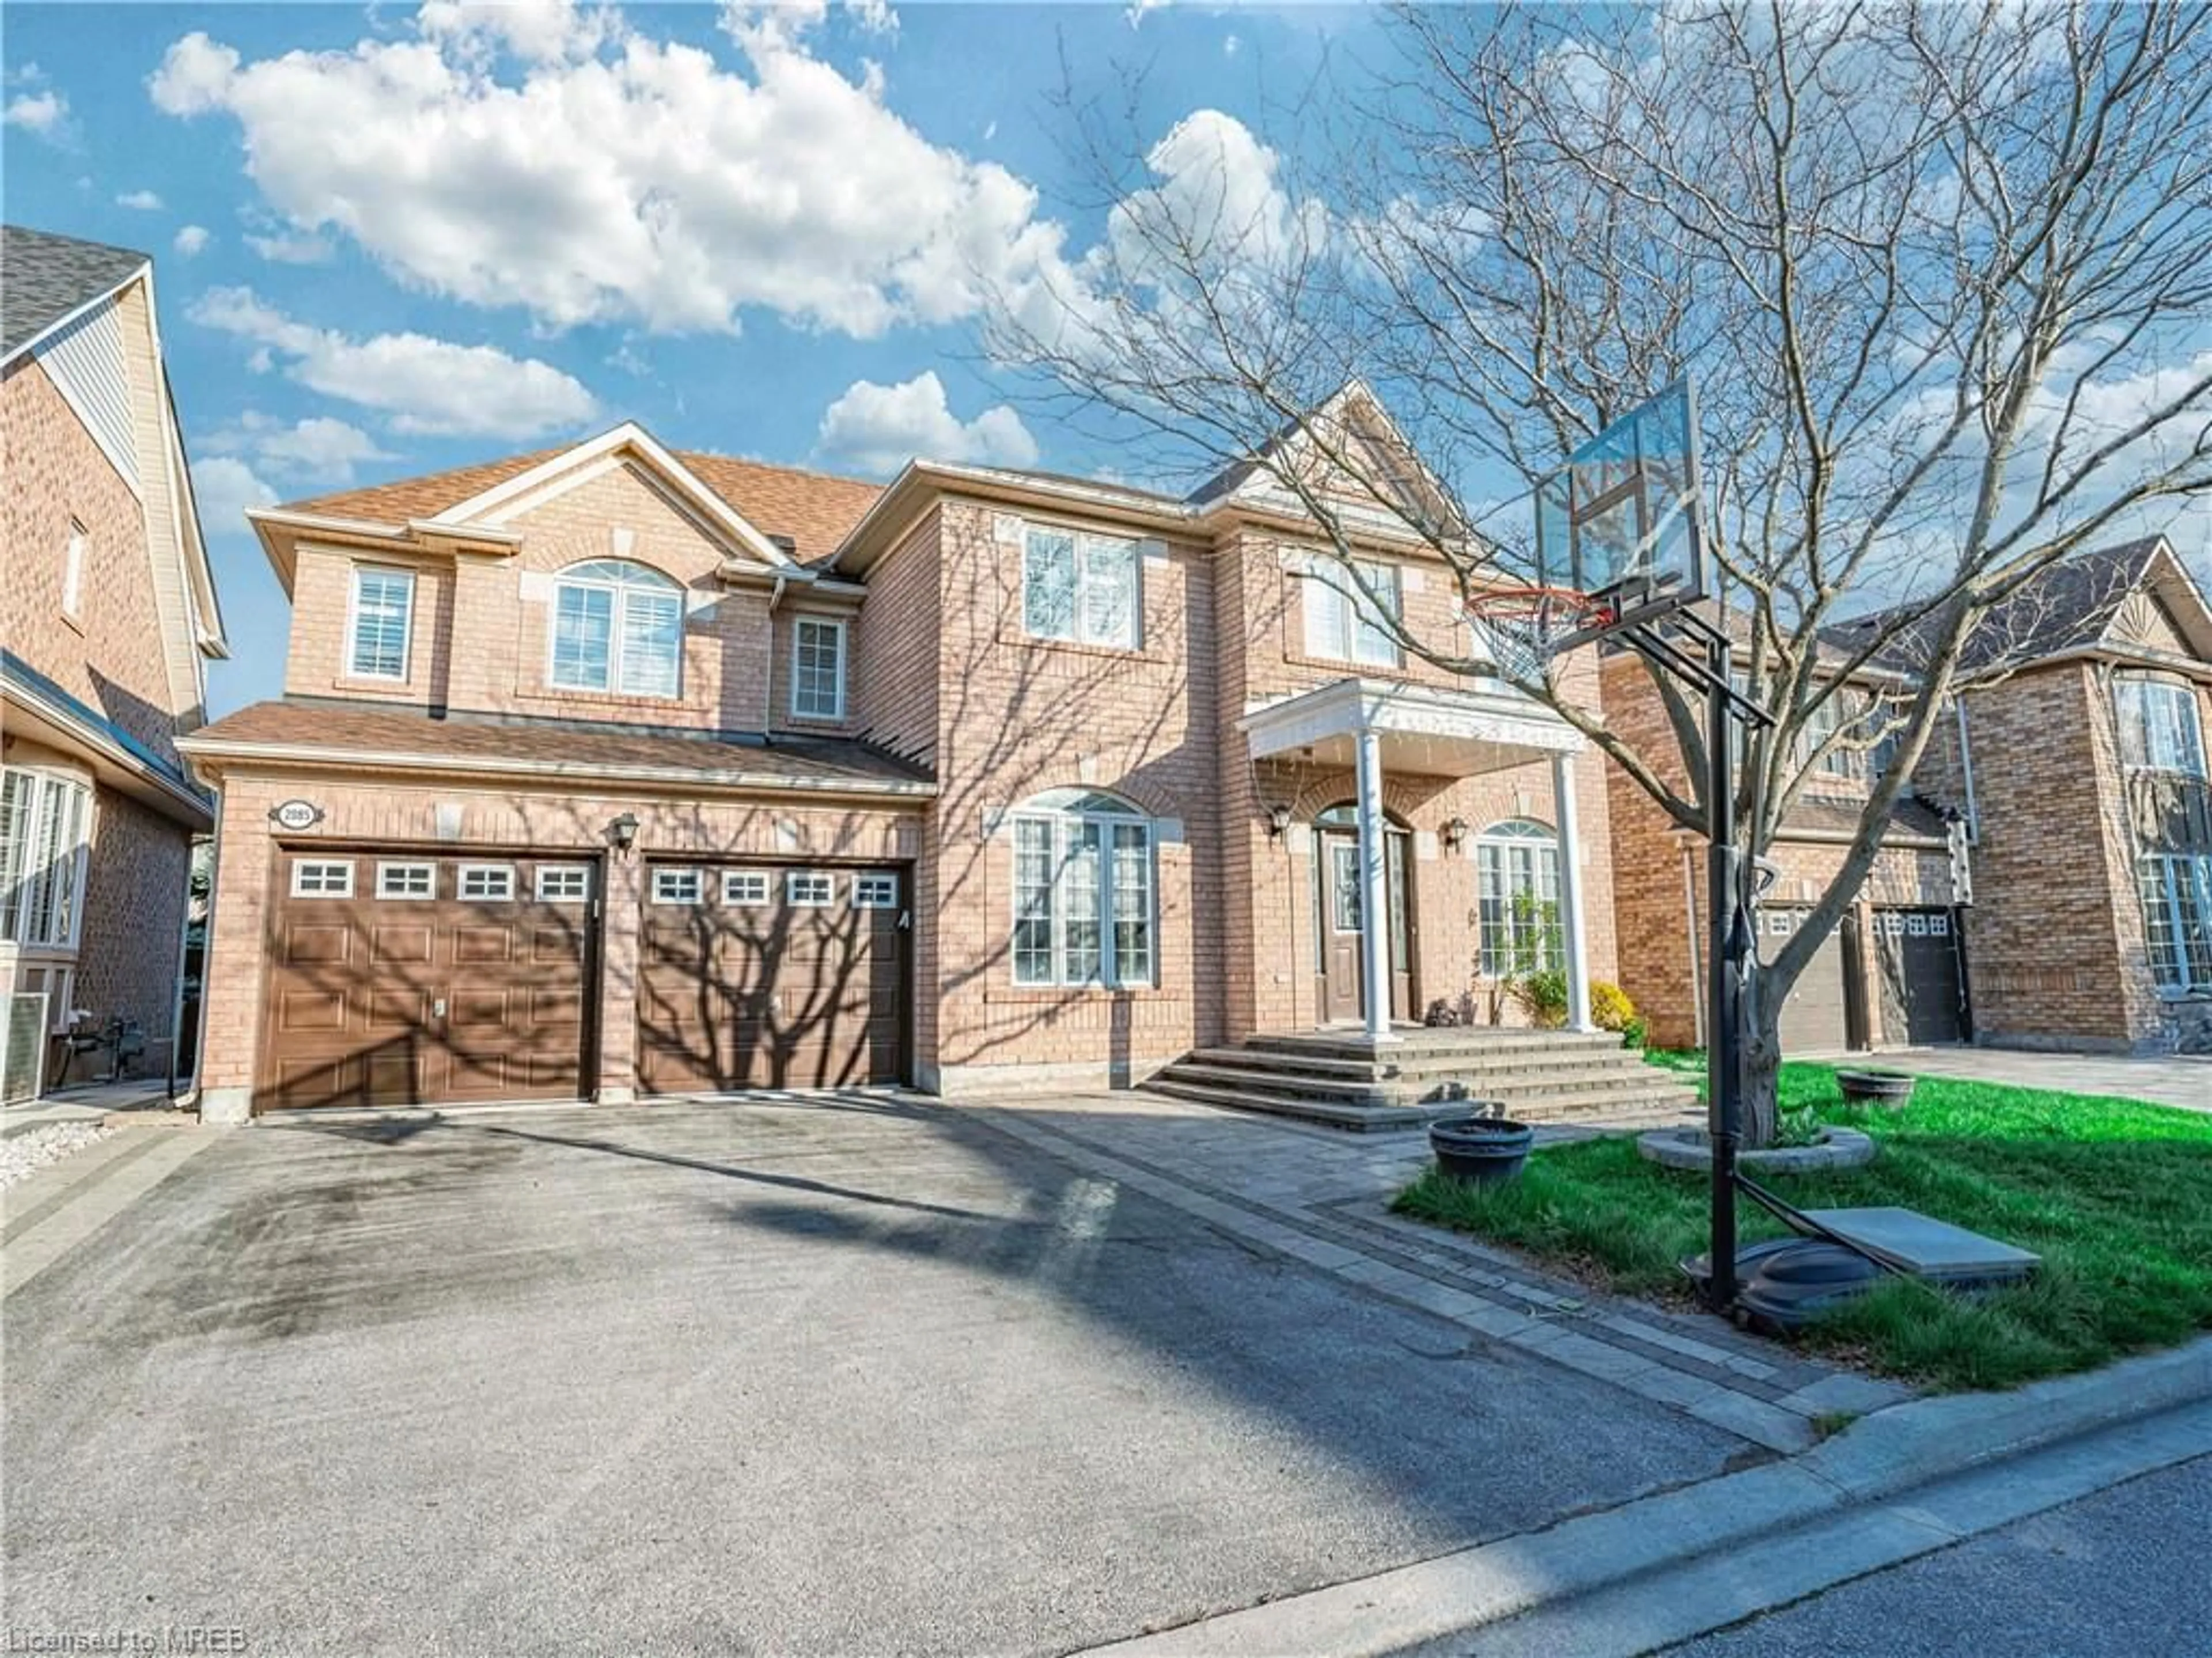 Home with brick exterior material for 2085 Ashmore Dr, Oakville Ontario L6M 4T2